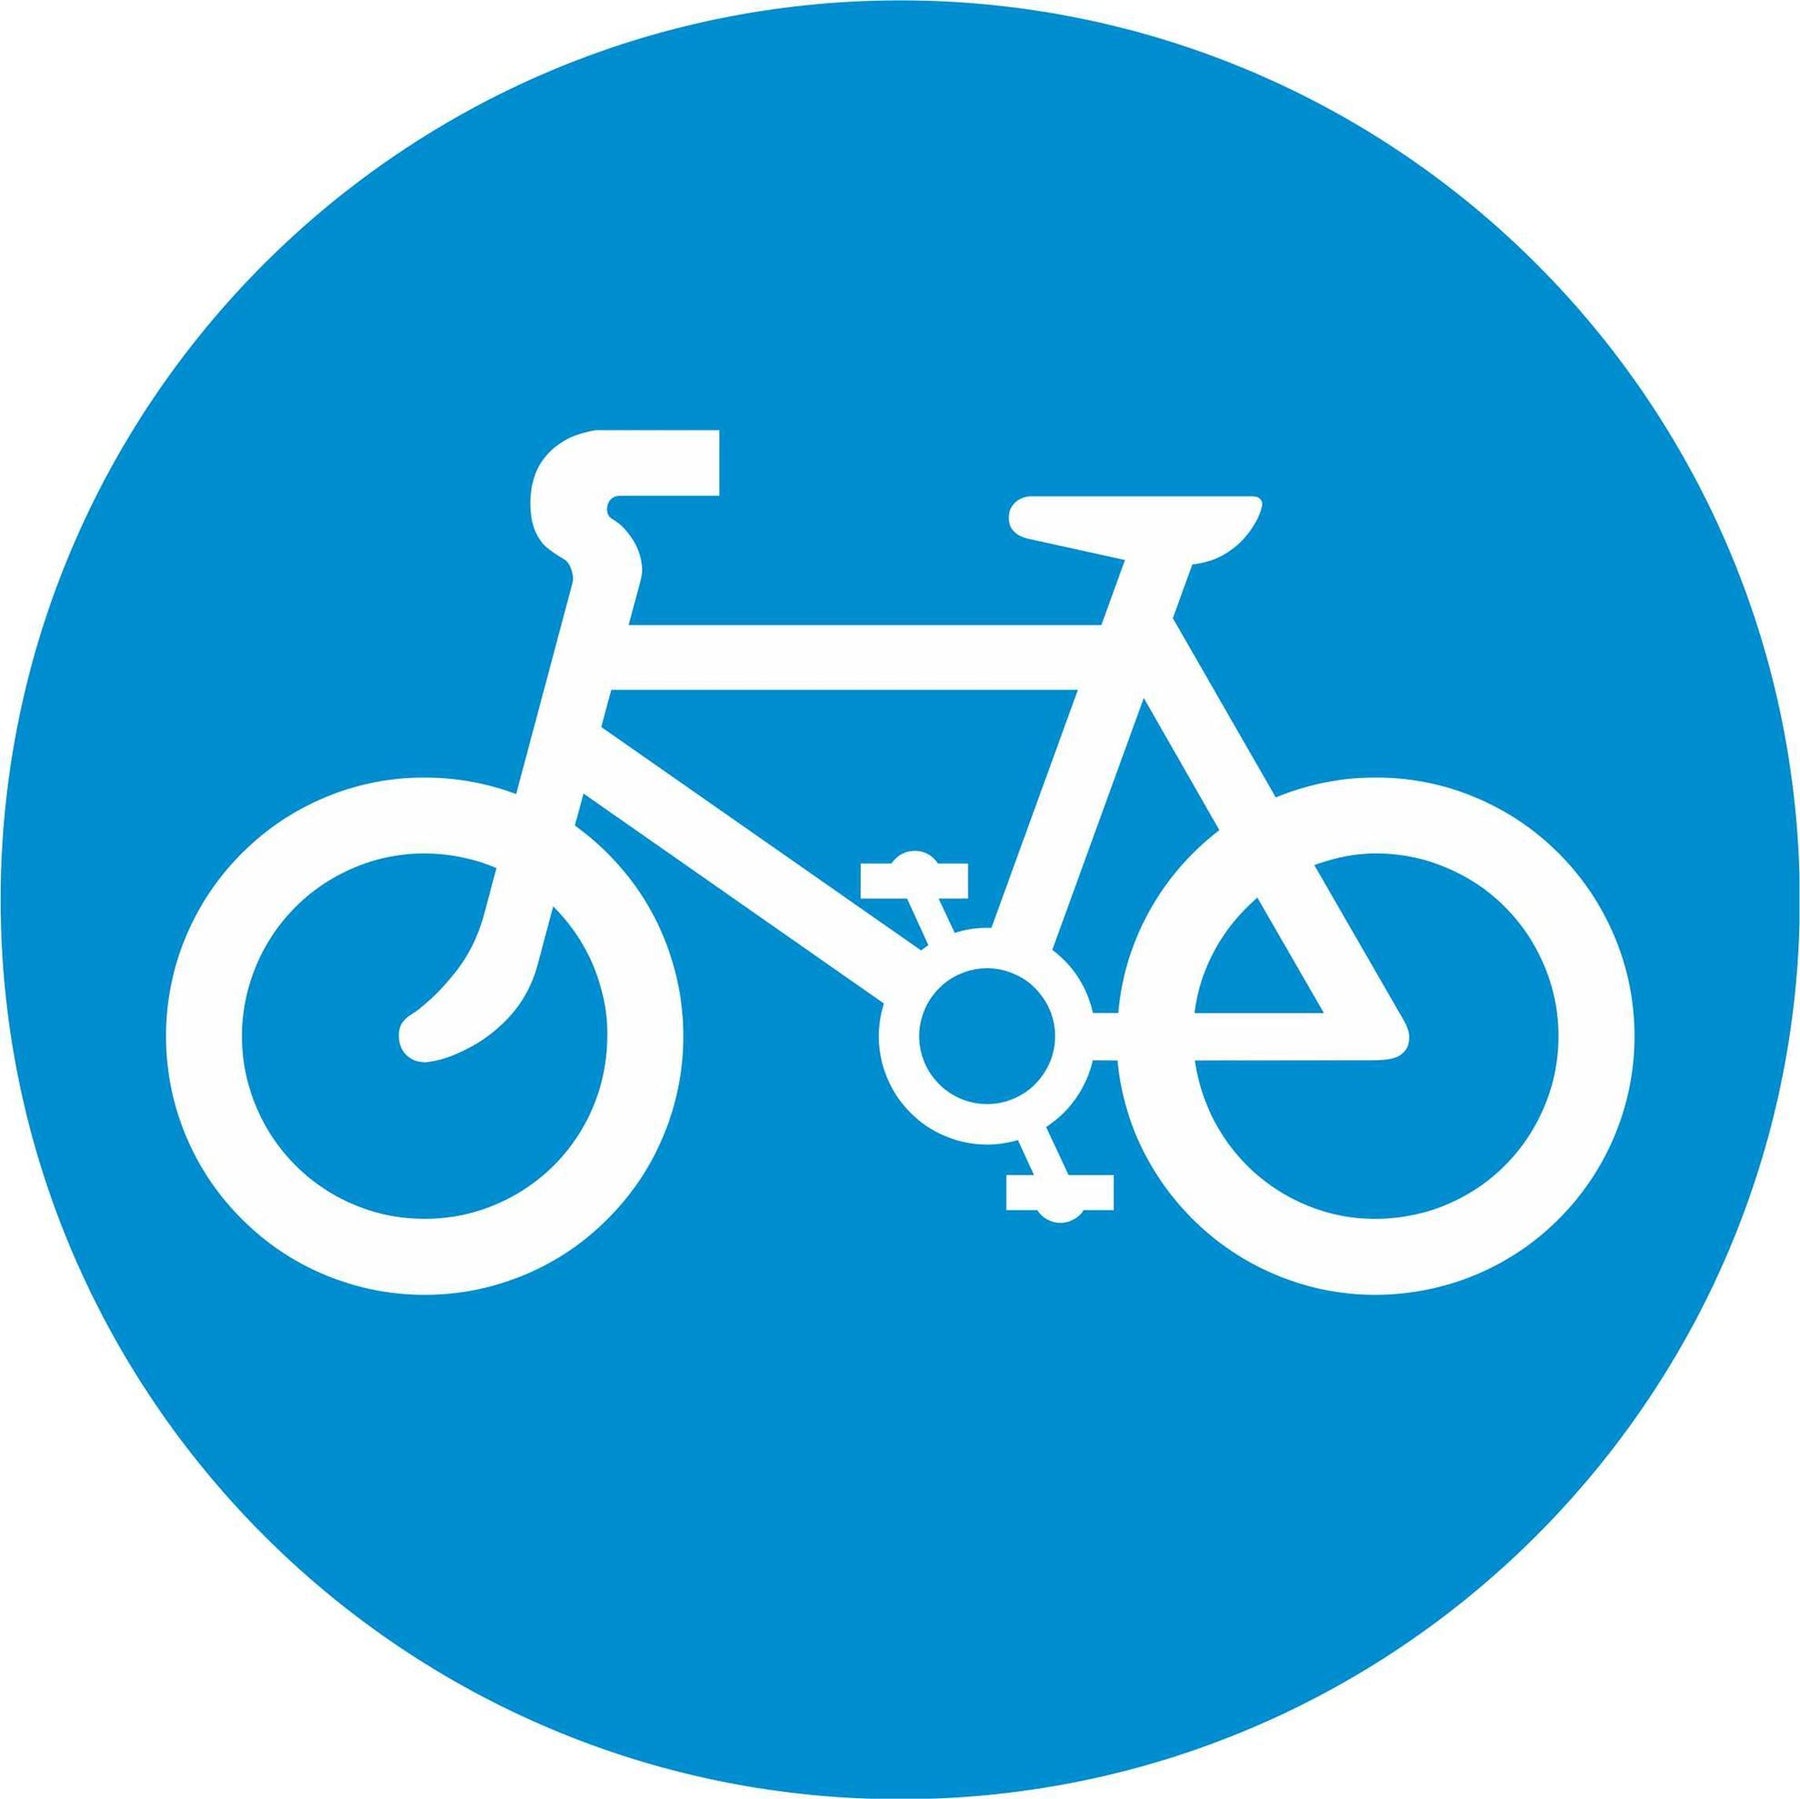 Pedal Cycles Only - Road Traffic Sign